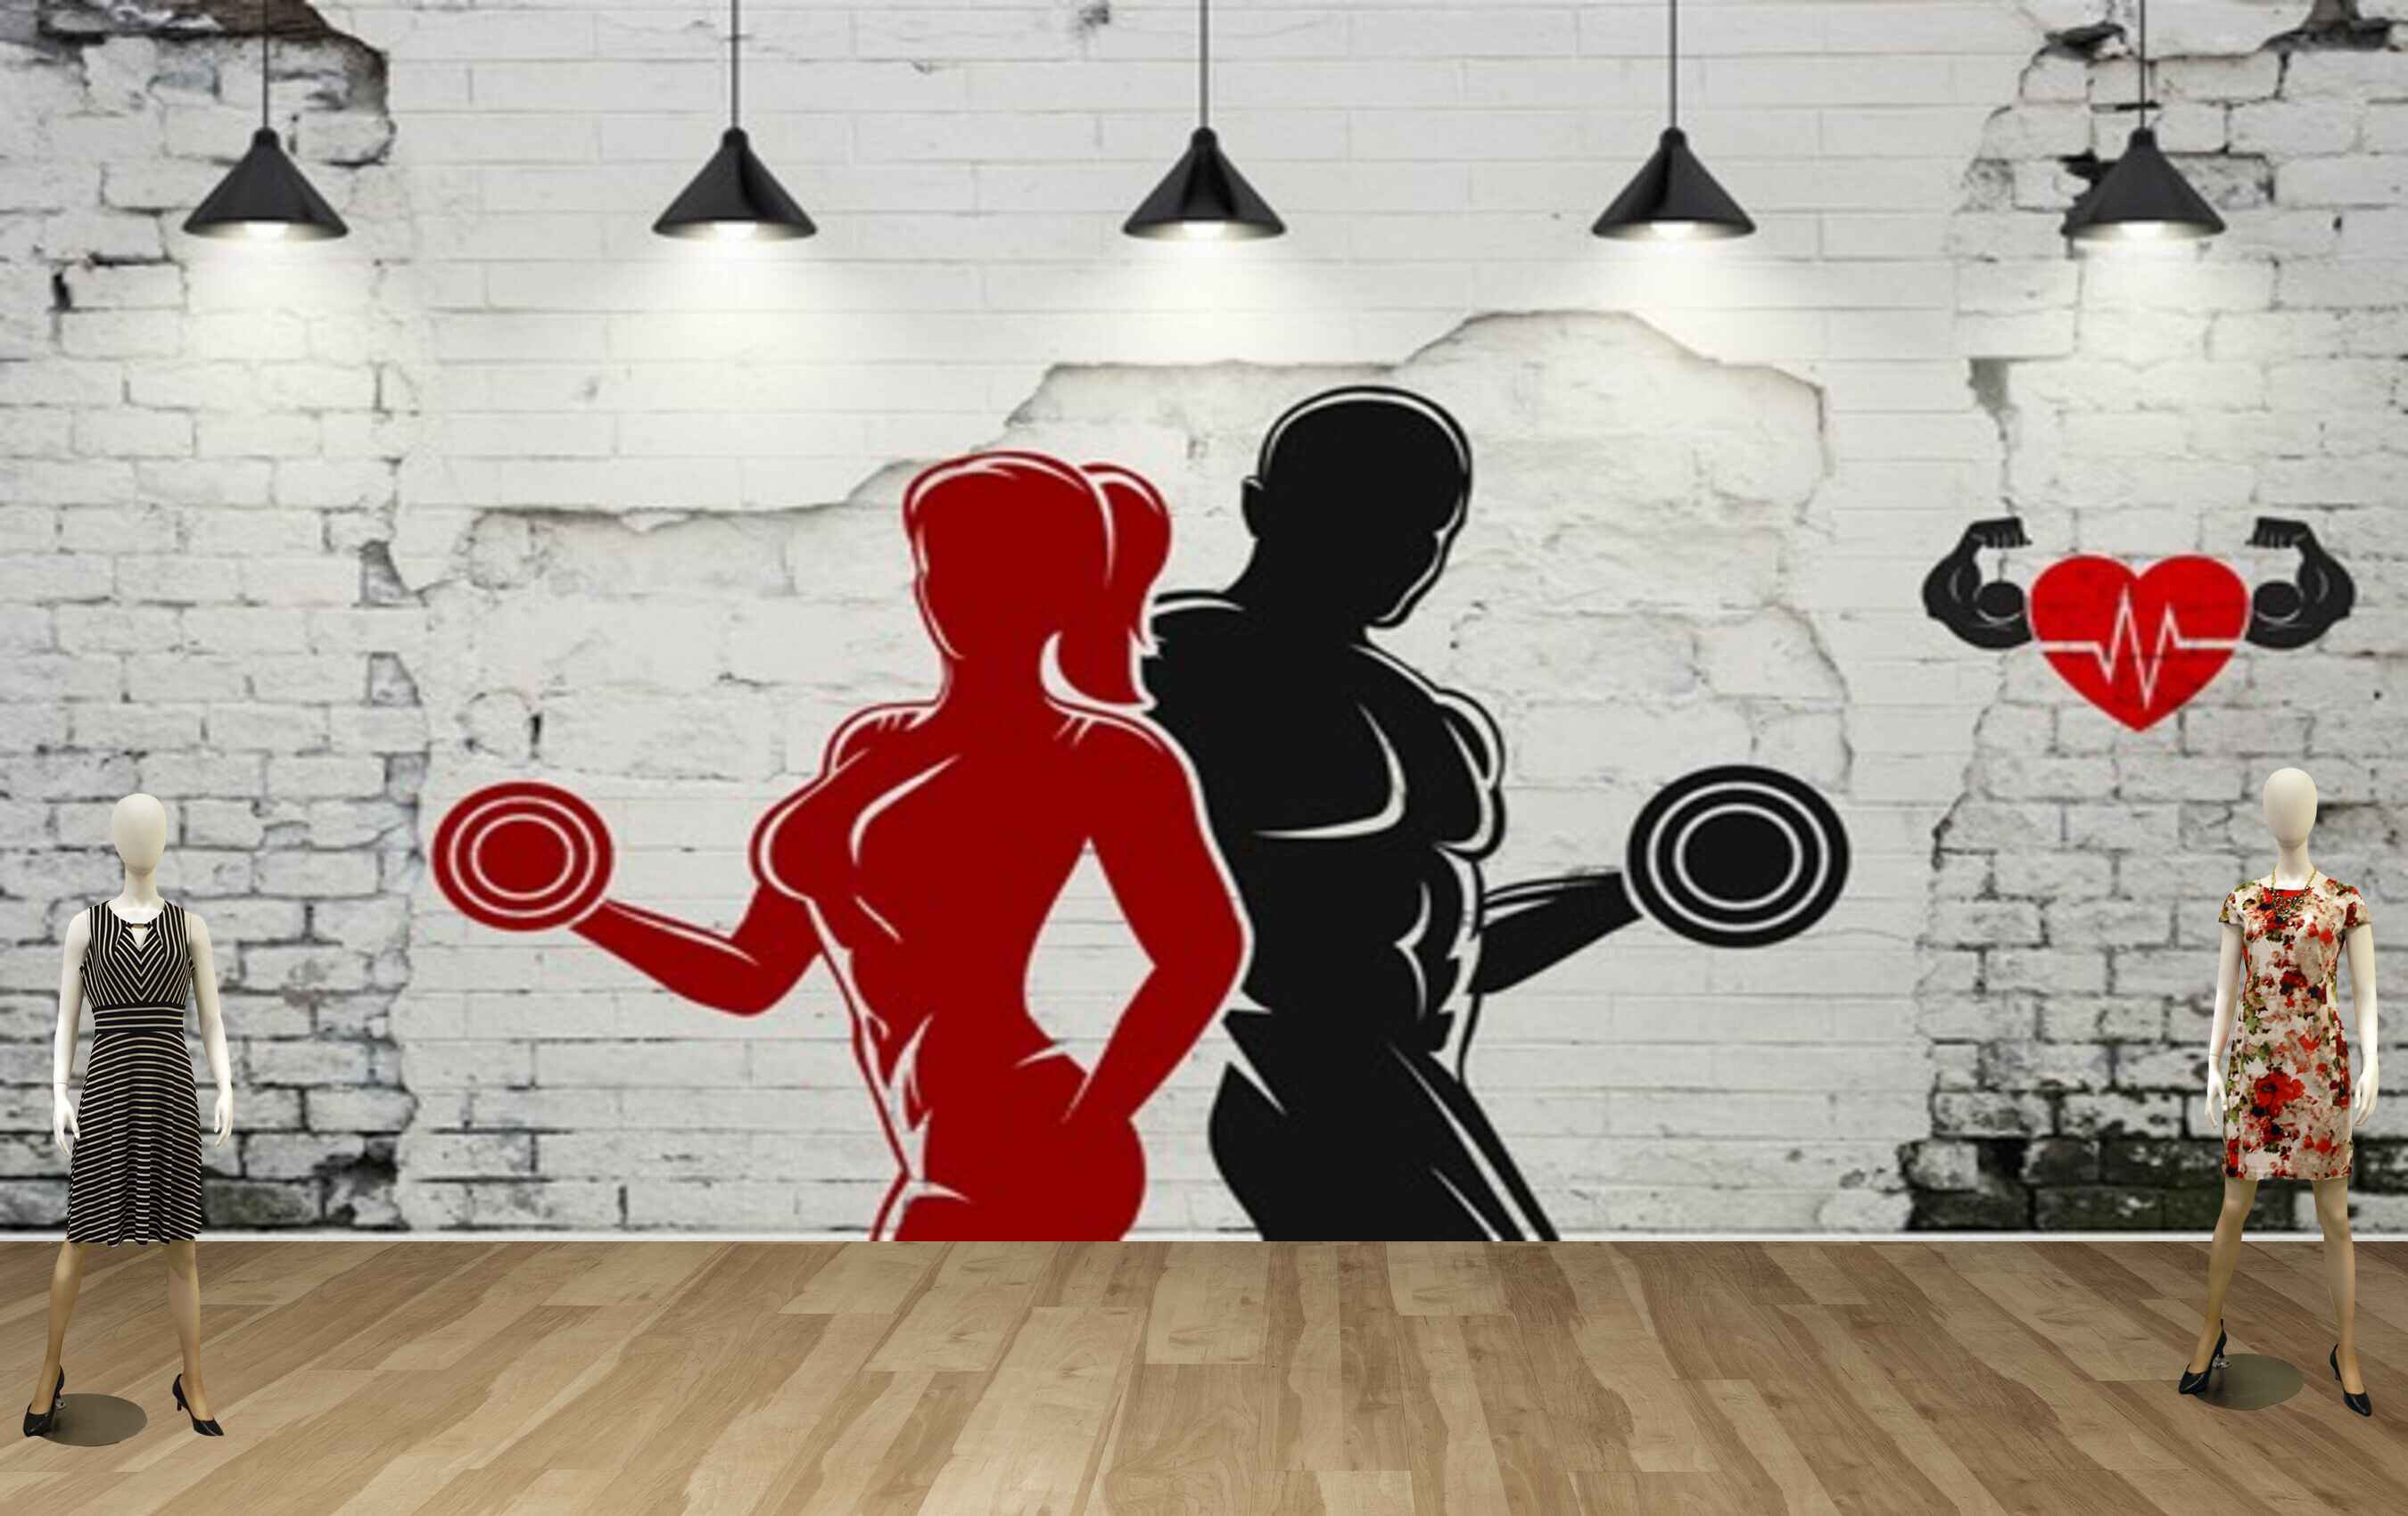 Wallpaper 3D Decoration Murals Wall Fitness Sports Gym Training Hall  Exercise-250Cmx175Cm - Amazon.com